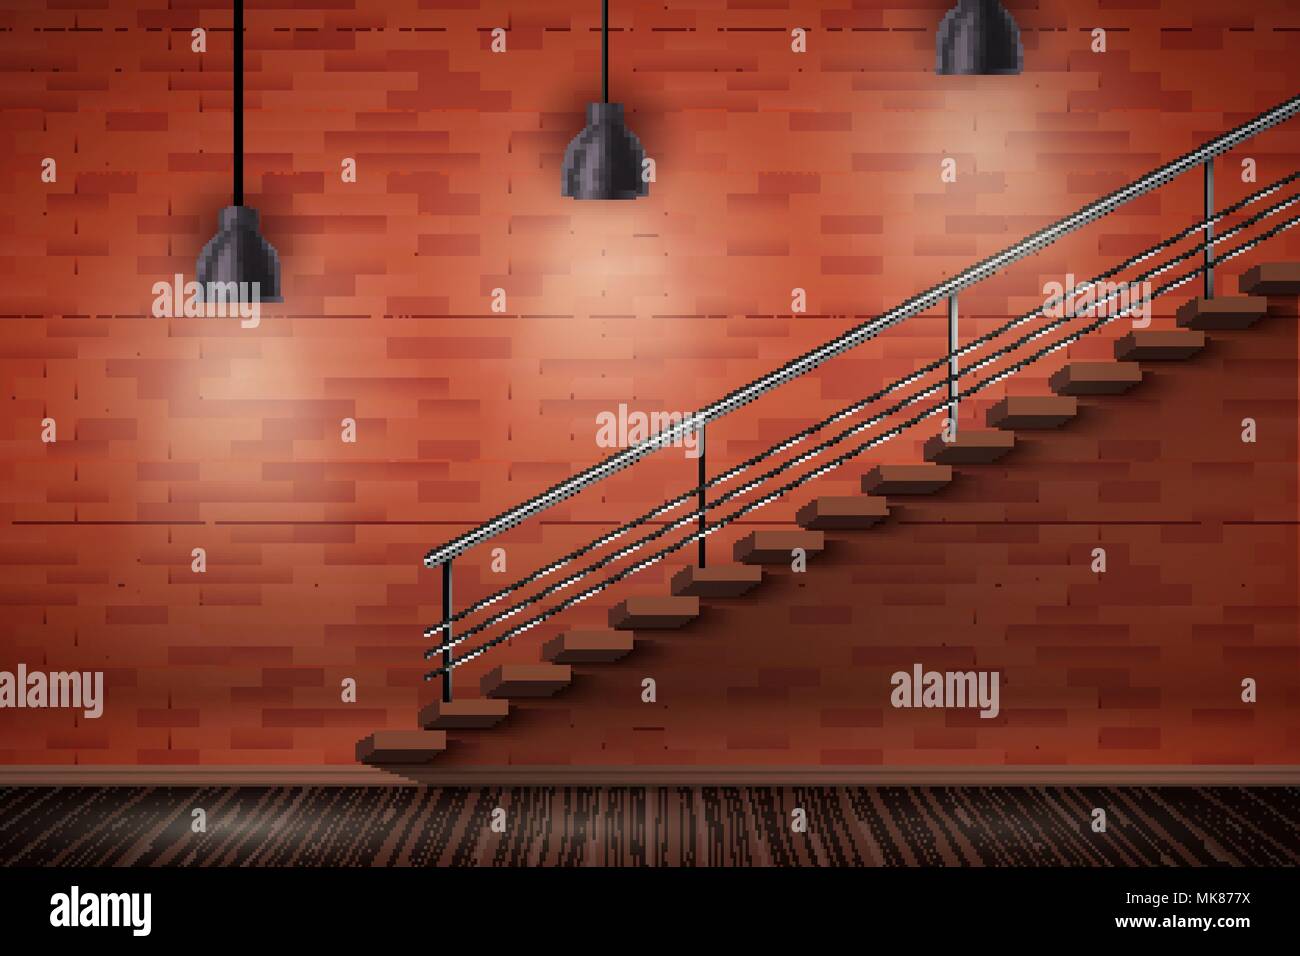 Loft Interior of red brick wall and staircase and wooden floor with vintage pedant lamps. Grunge Industrial Interior. Vector Illustration. Stock Vector